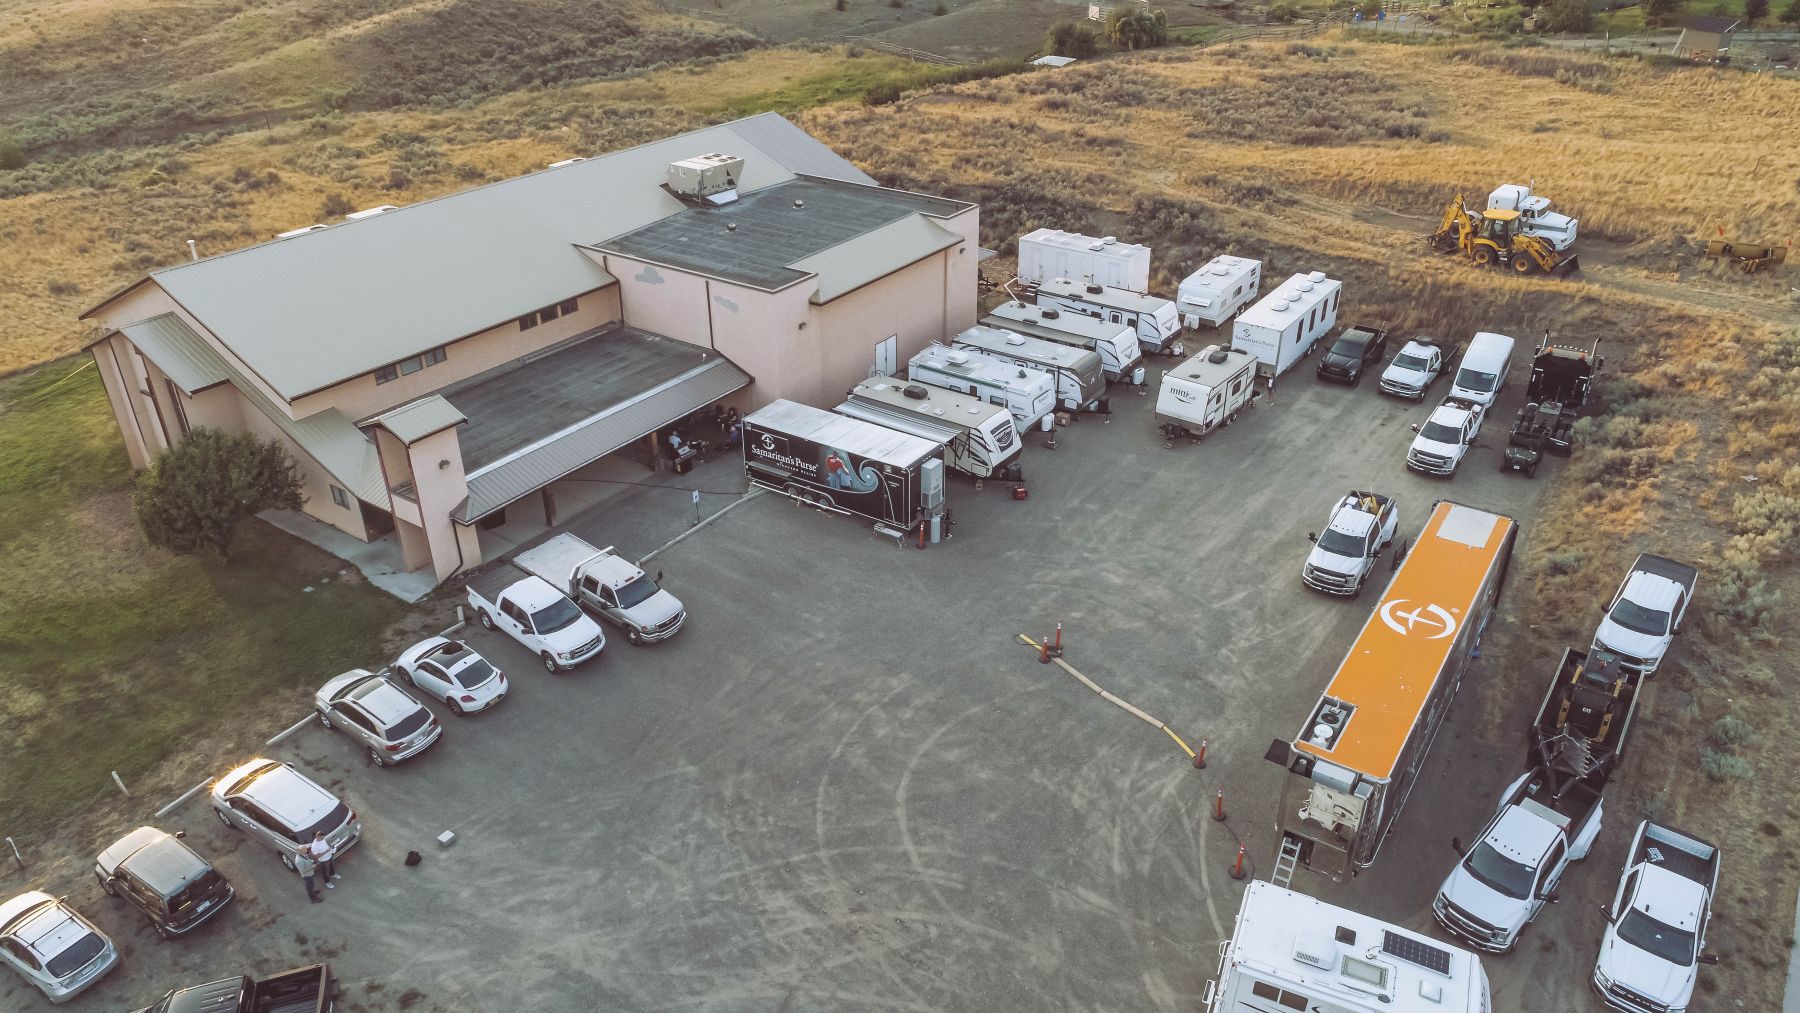 Prayers and donations from Canadians like you made it possible for Samaritan’s Purse to have a convoy of disaster relief vehicles stationed in the B.C. interior to aid with wildfire relief work.